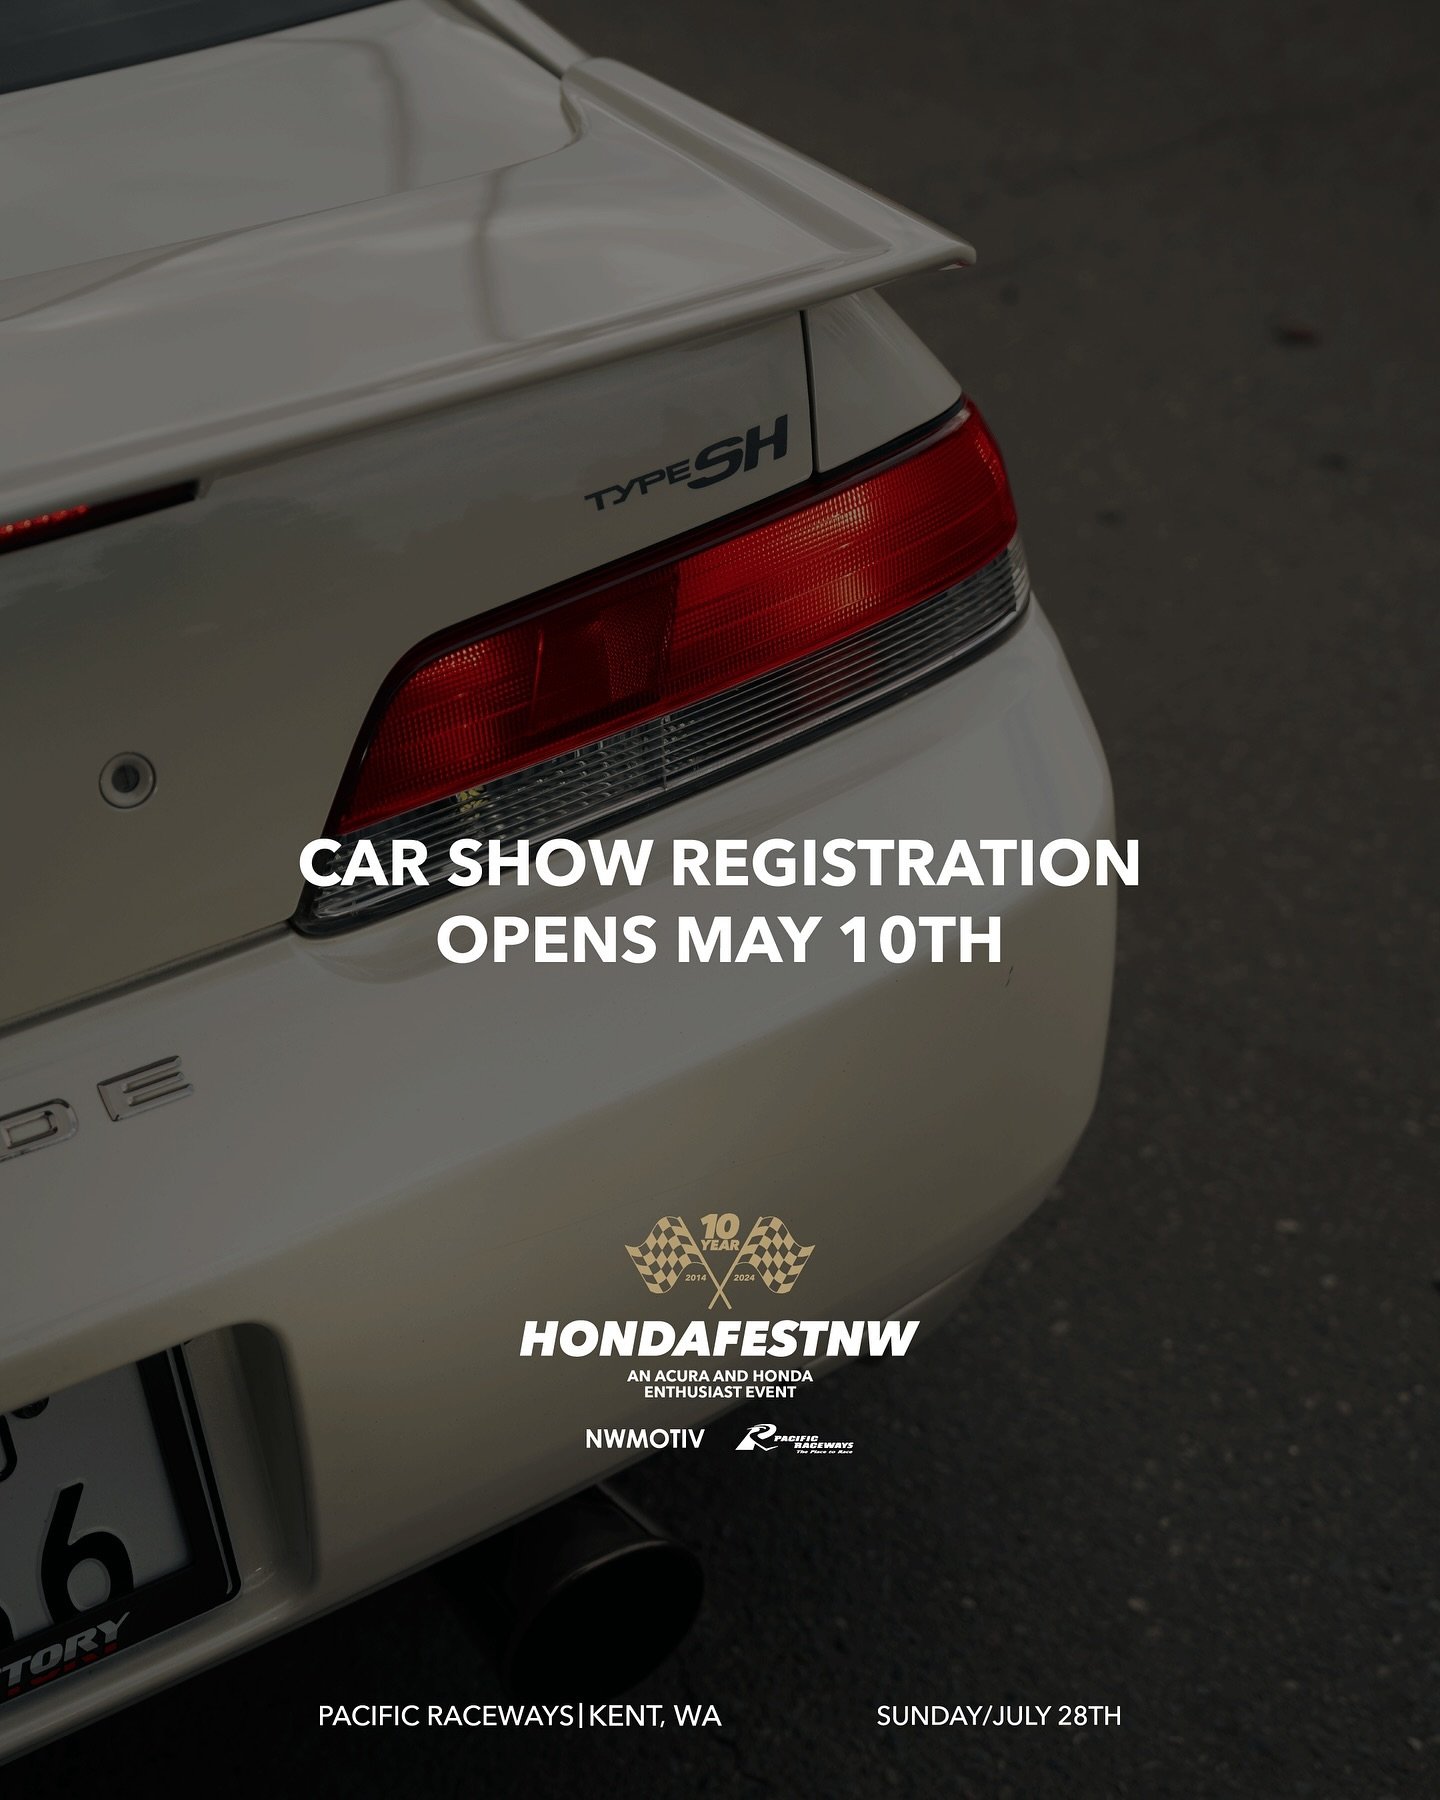 Car show registration for @hondafestnw opens up this Friday at 9pm! 

Spread the word and celebrate with us, the 10 year anniversary of the biggest Acura and Honda enthusiast event in the PNW!